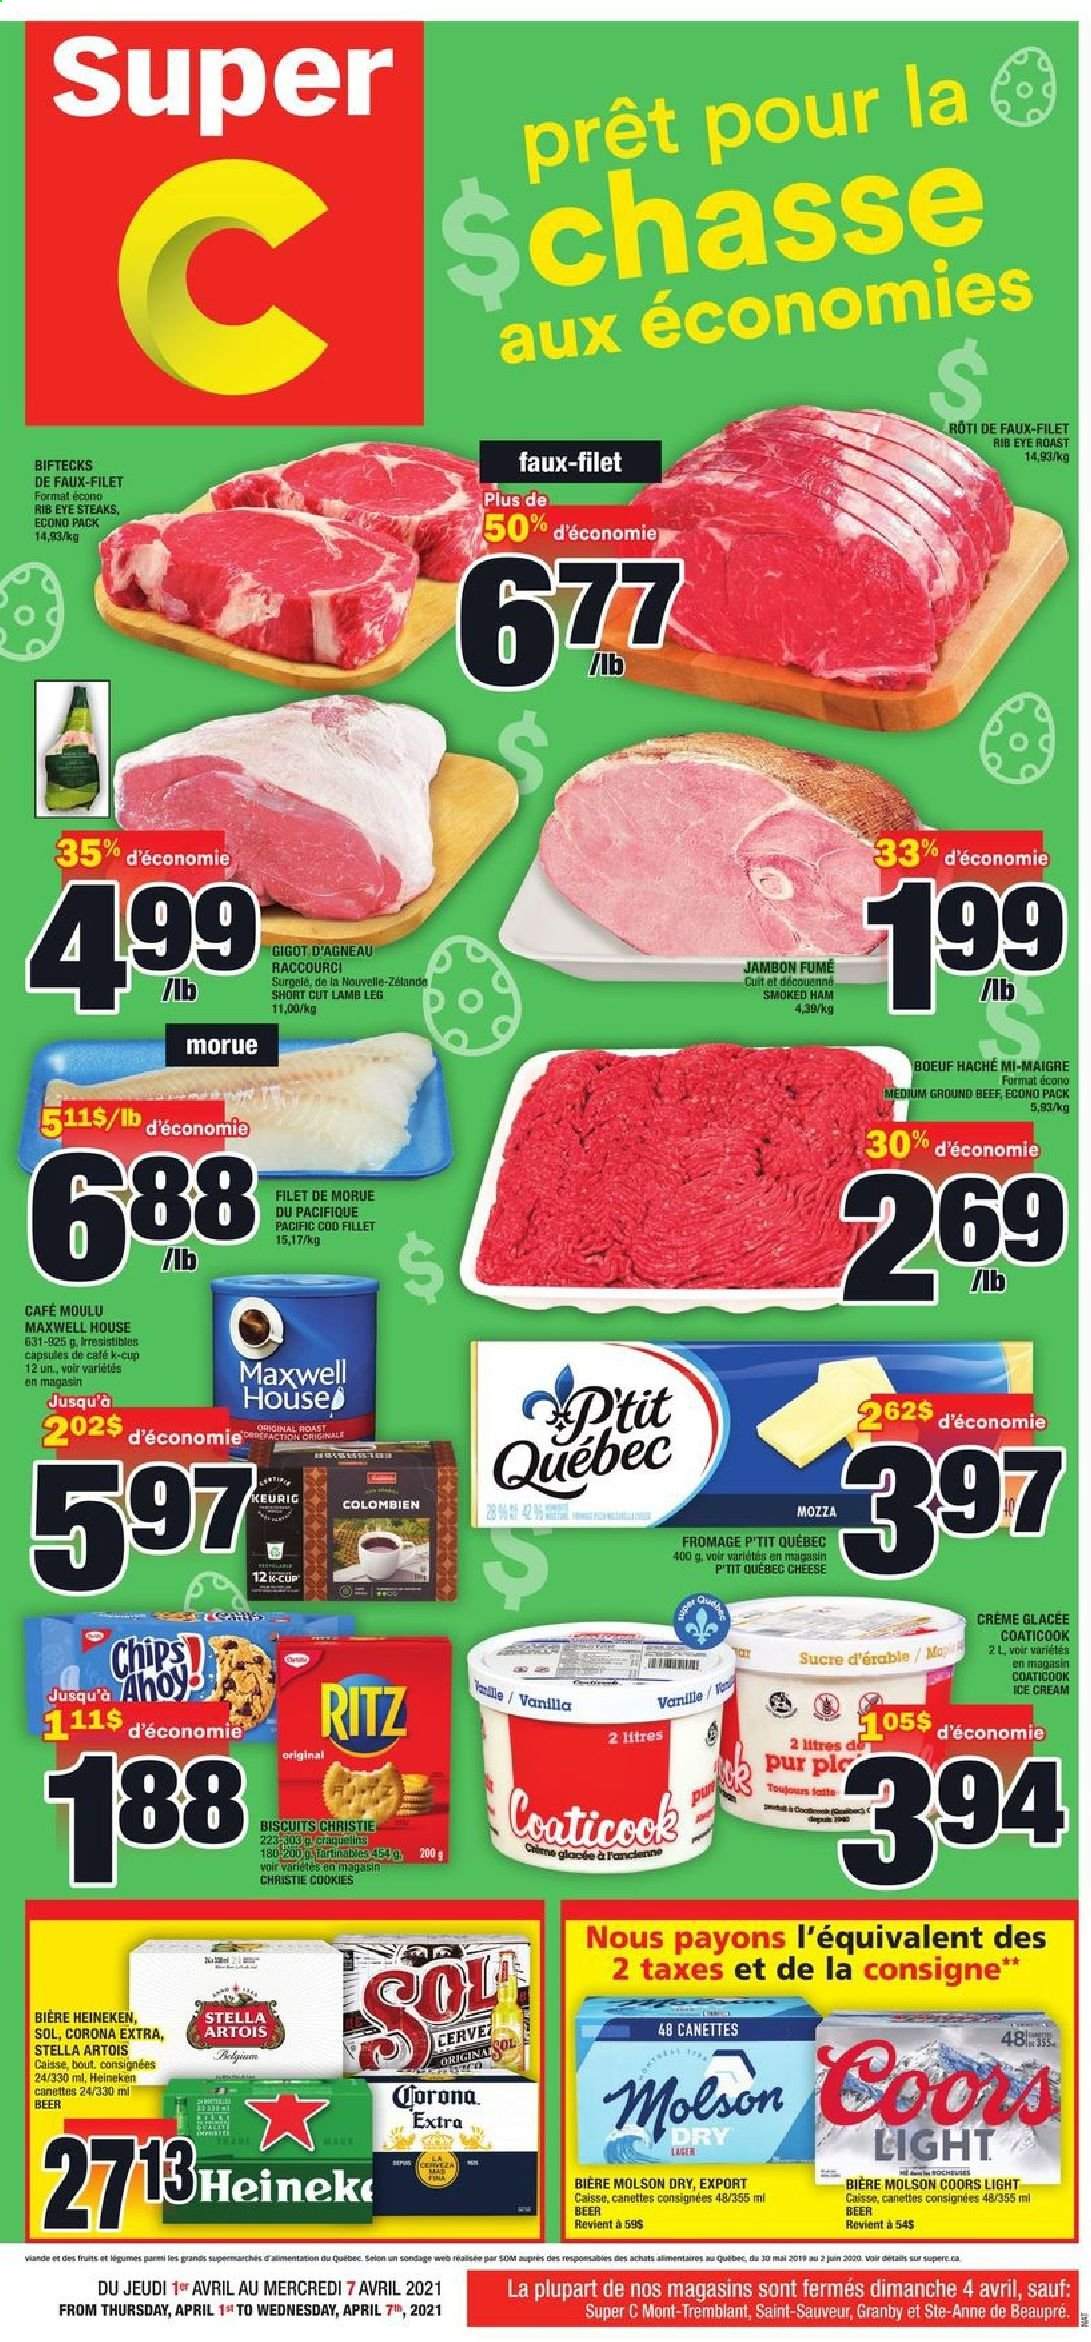 thumbnail - Super C Flyer - April 01, 2021 - April 07, 2021 - Sales products - cod, ham, smoked ham, cheese, ice cream, cookies, biscuit, RITZ, Maxwell House, coffee capsules, K-Cups, beer, Stella Artois, Coors, Corona Extra, Heineken, Sol, beef meat, ground beef, lamb meat, lamb leg, chips, steak. Page 1.